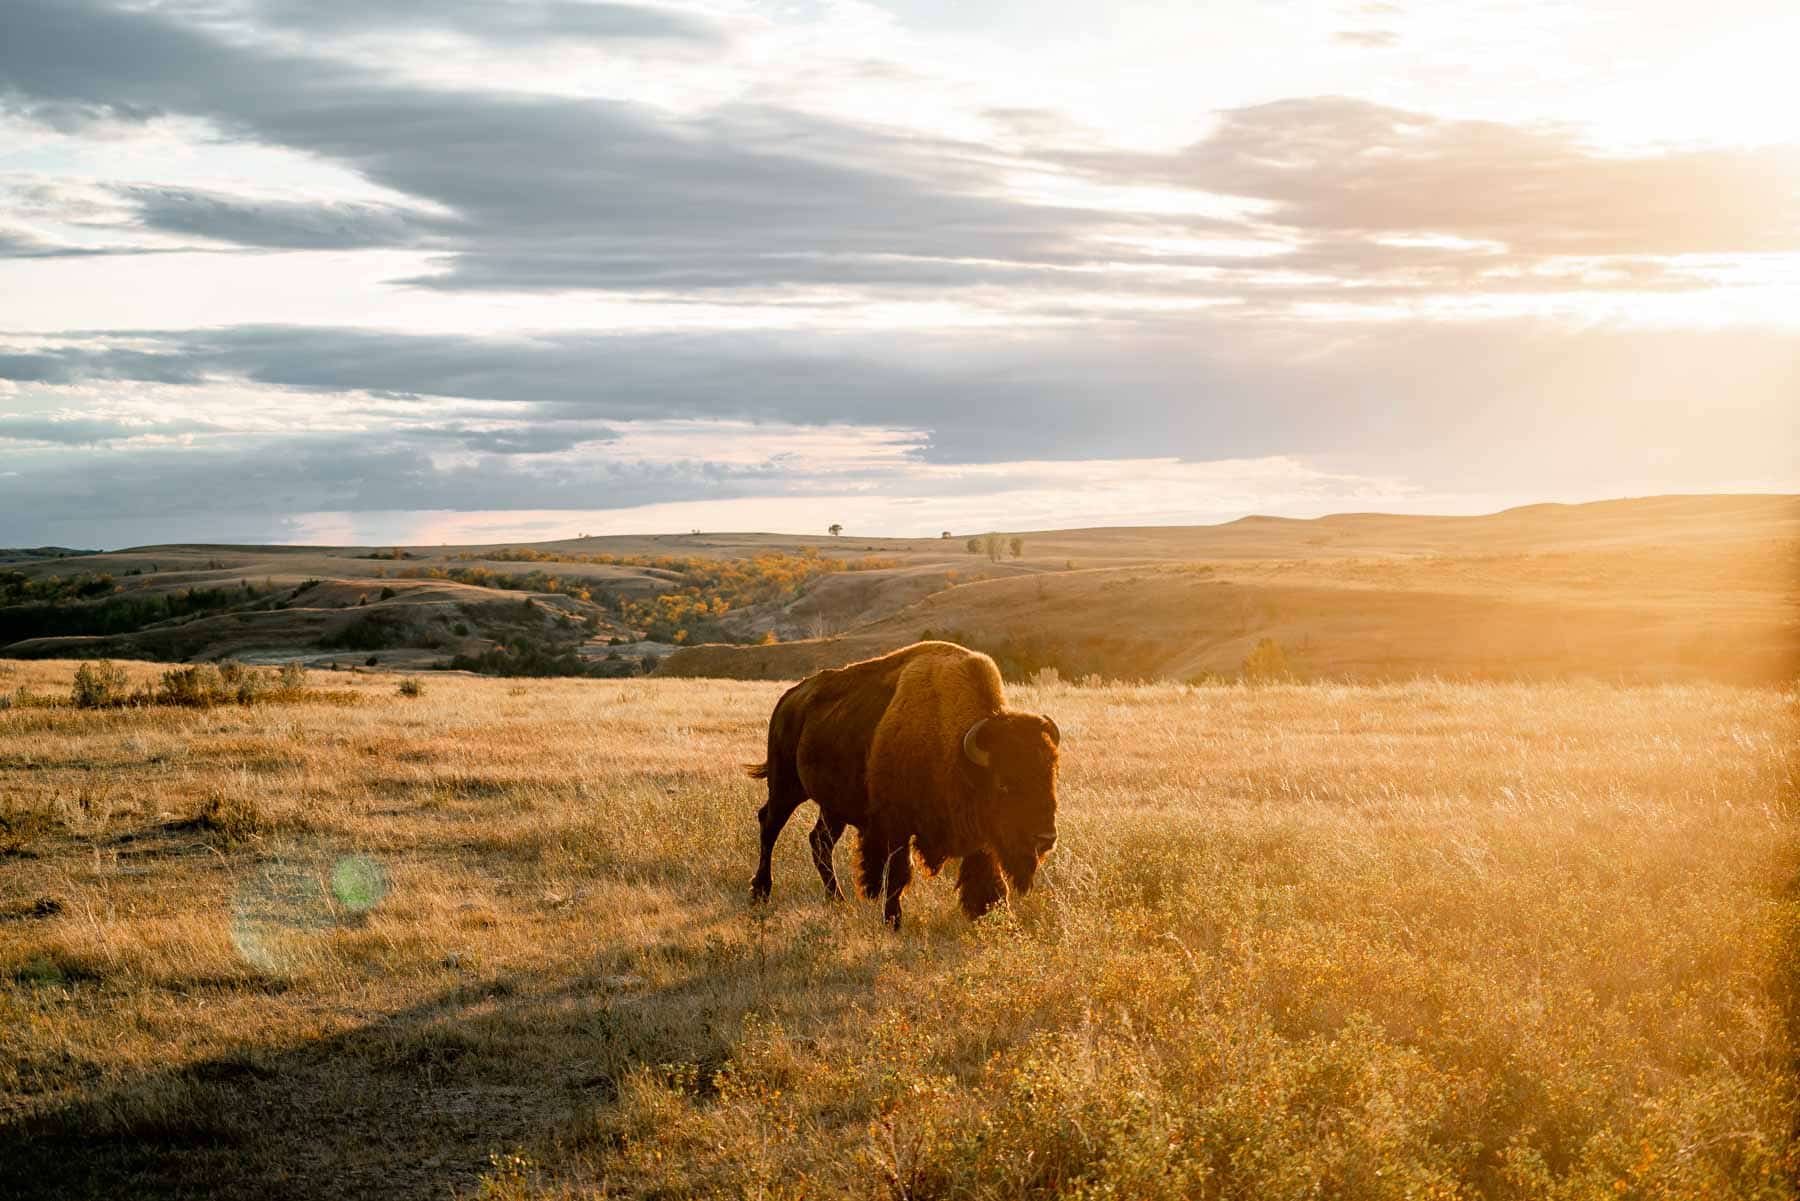 Theodore Roosevelt National Park is Insanely Beautiful (Photos + Video)